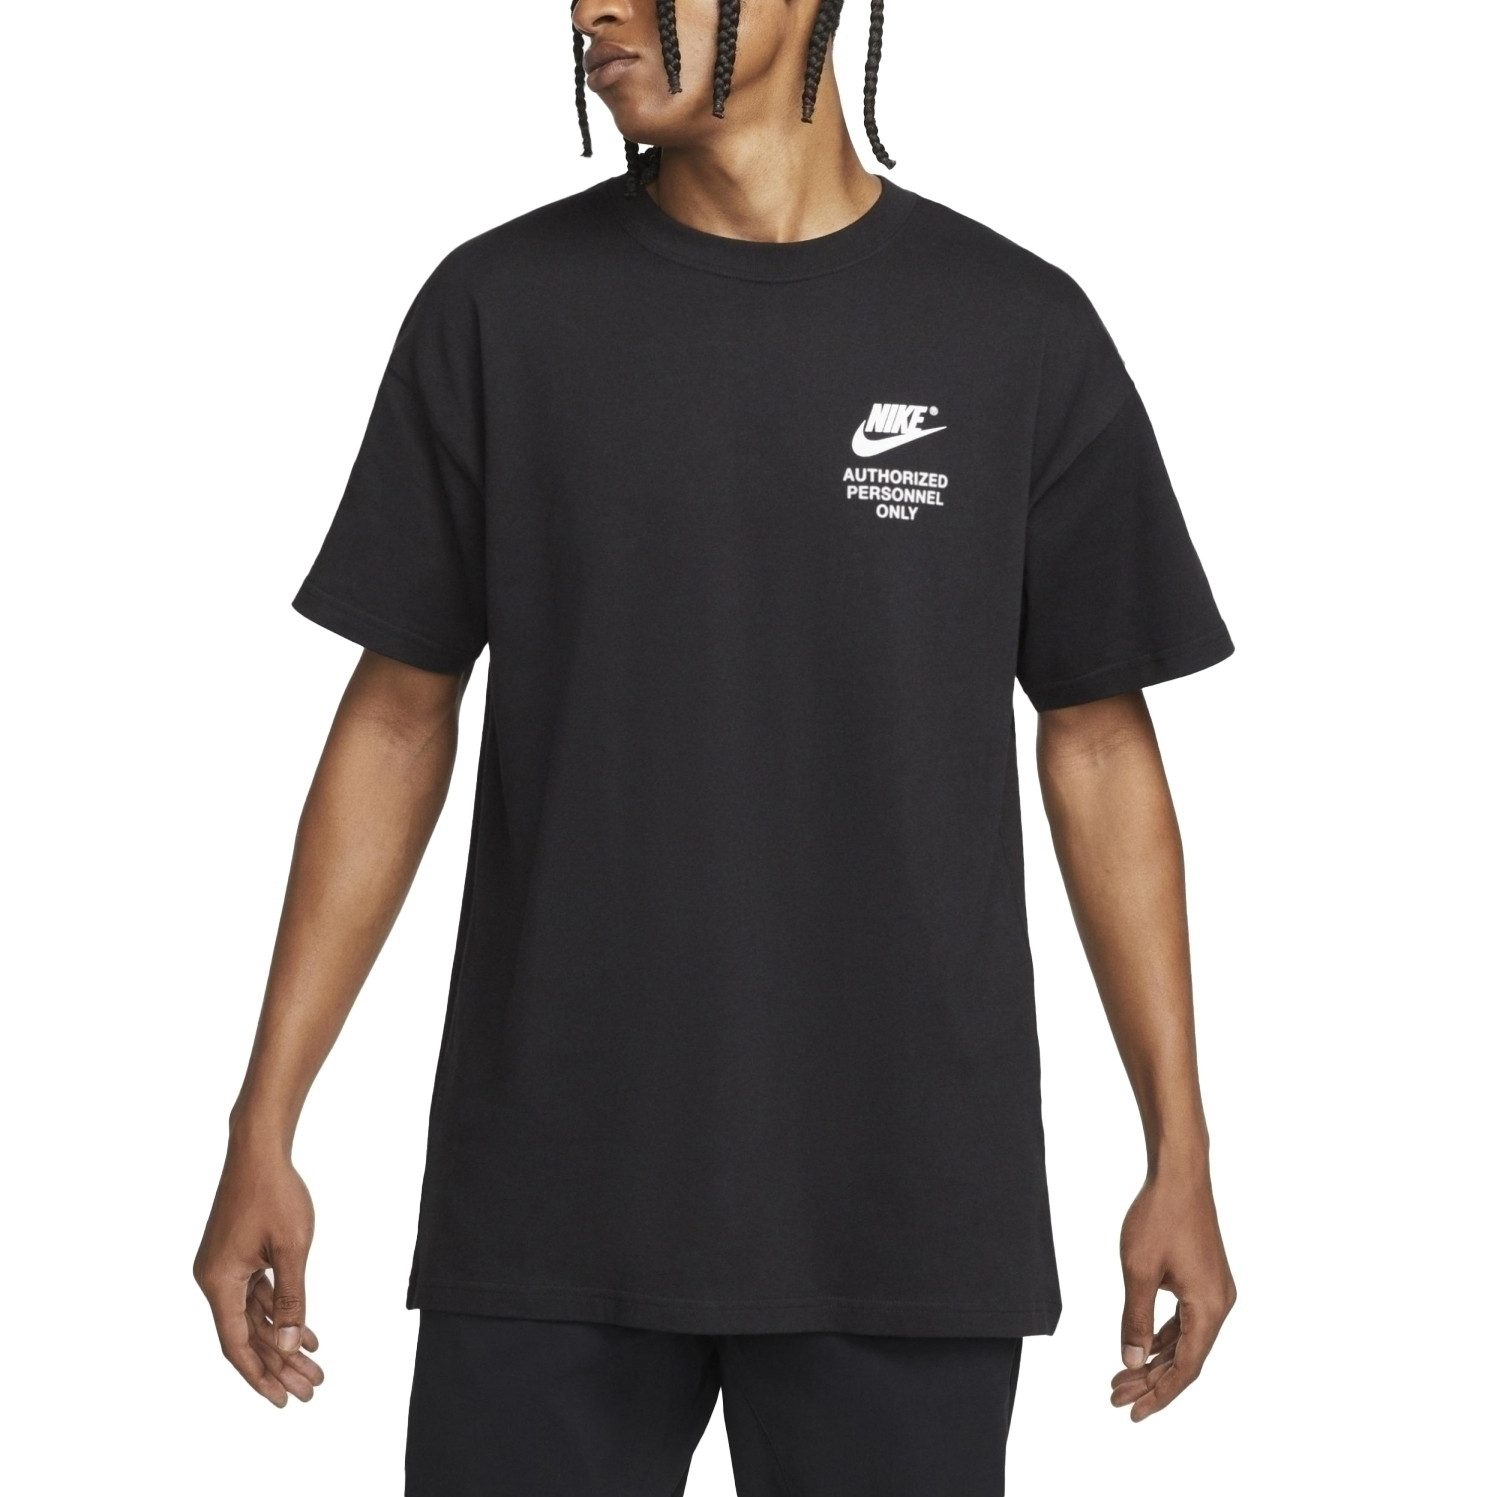 Nike T-Shirt Nike Sportswear Authorized Personnel Only Tee